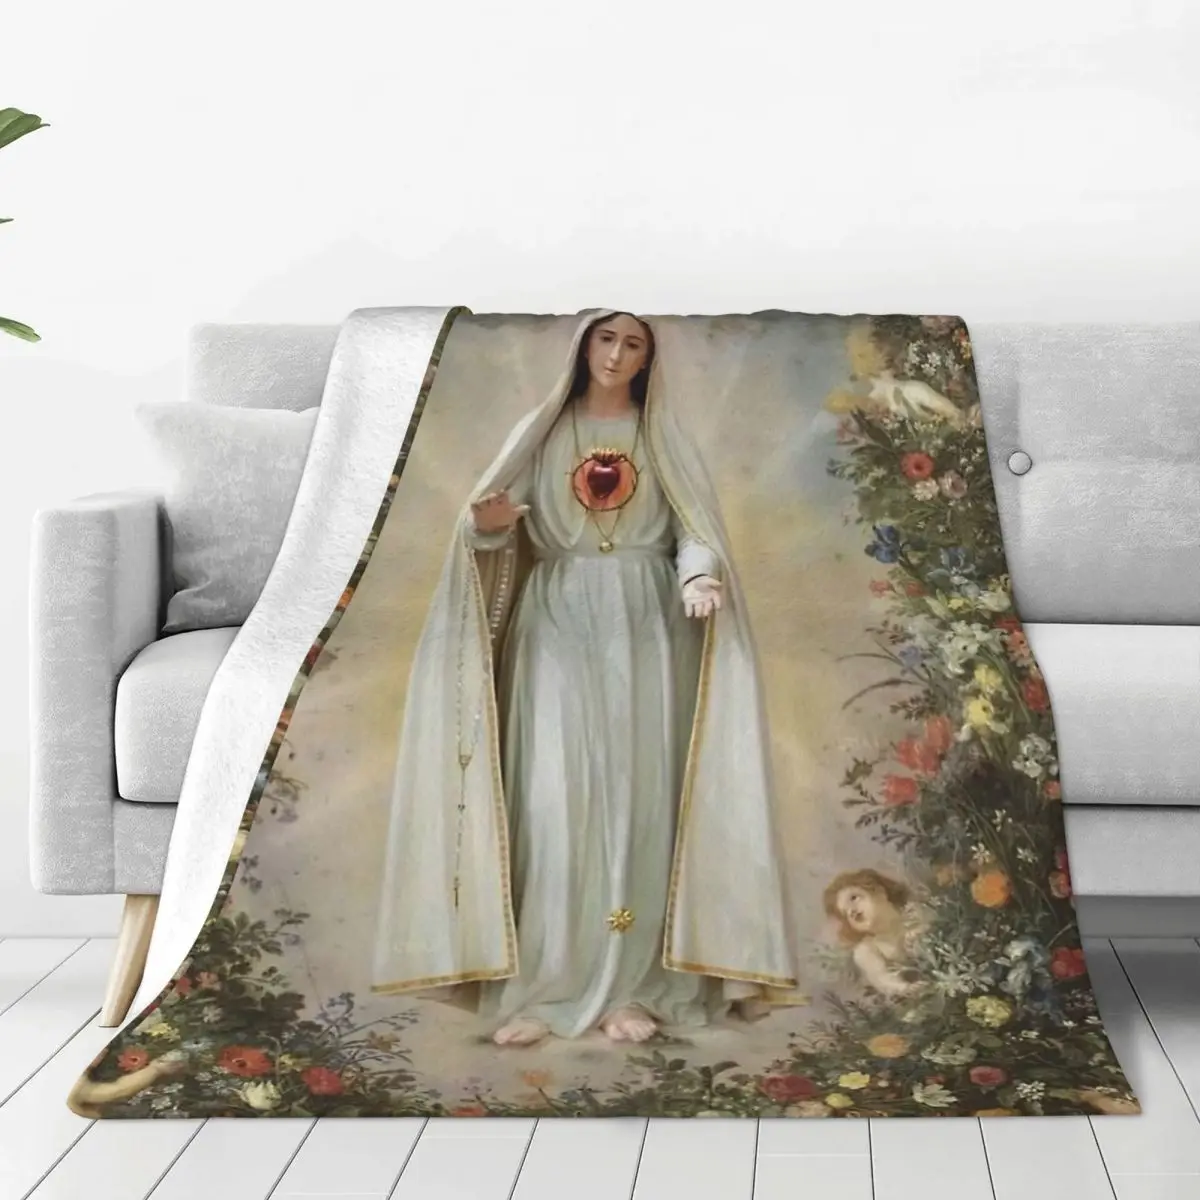 

Virgin Mary Immaculate Heart Of Mary Flannel Fleece Blanket For Kids Teens Adults Soft Cozy Warm Fuzzy